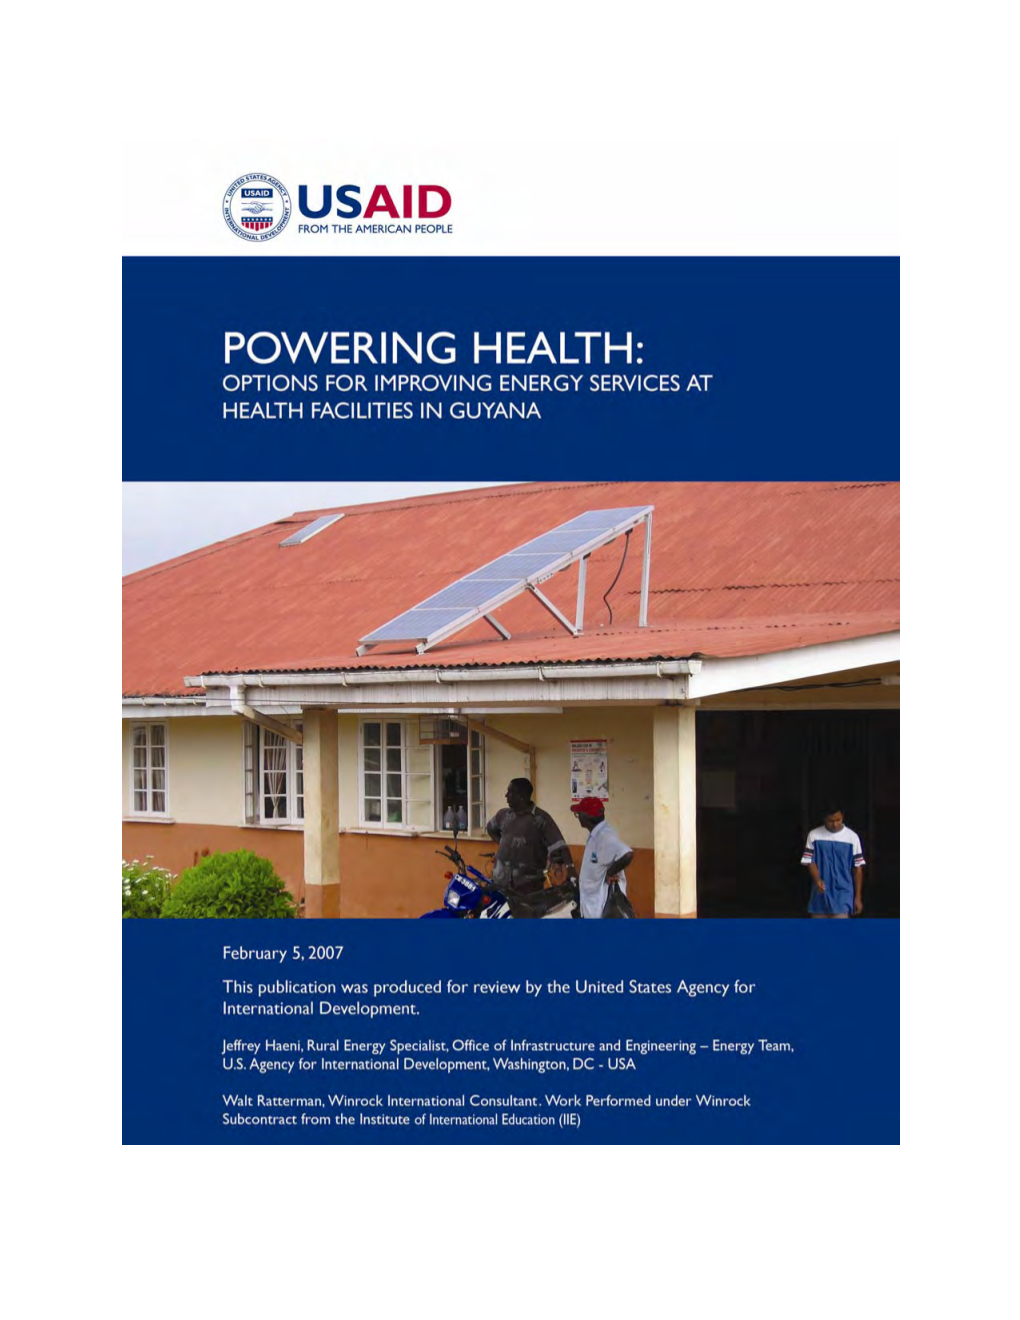 Options for Improving Energy Services at Health Facilities in Guyana